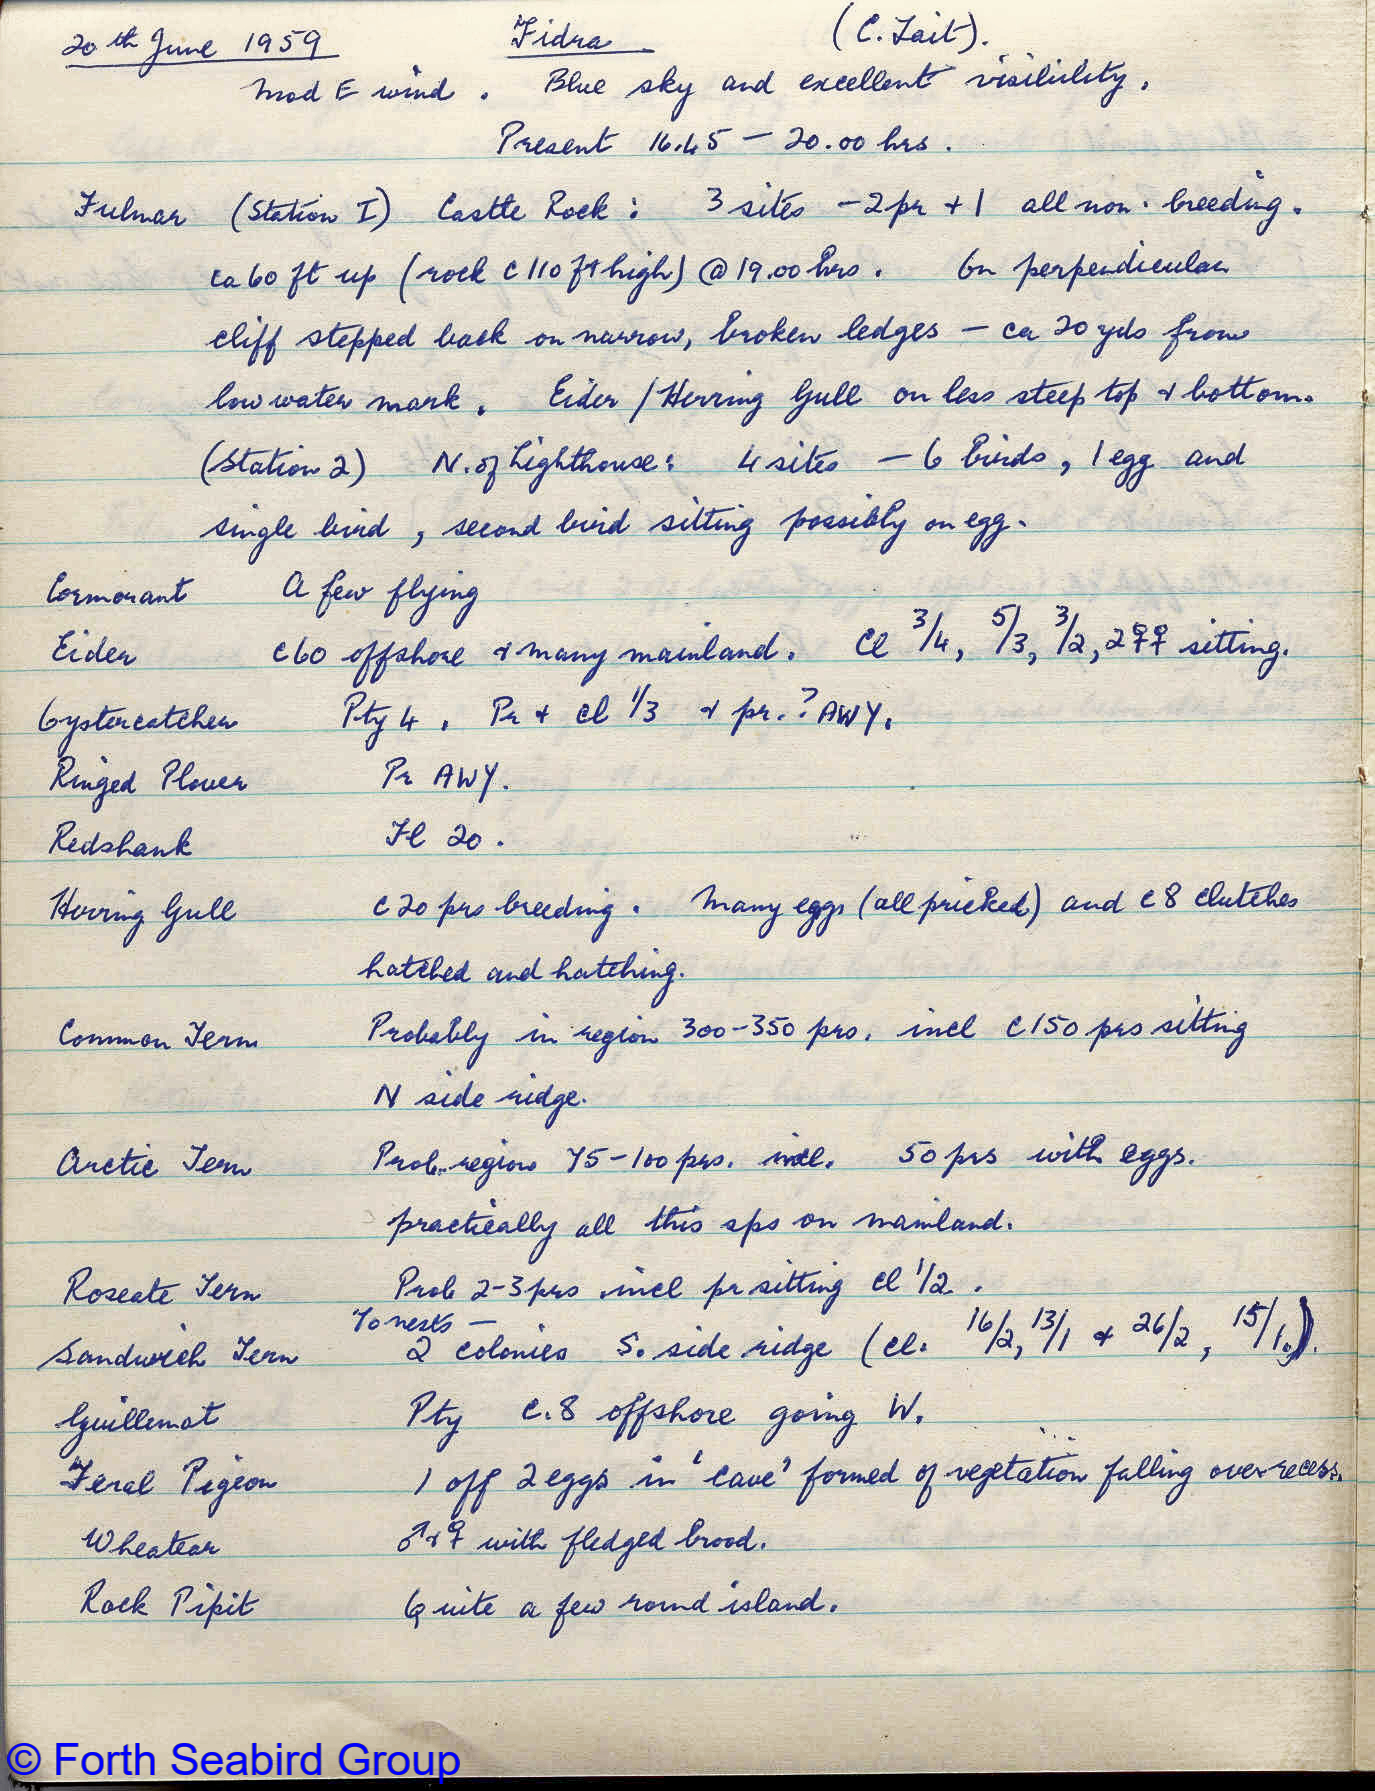 Scan of Bob Smith's notebook for 1959 Fidra count